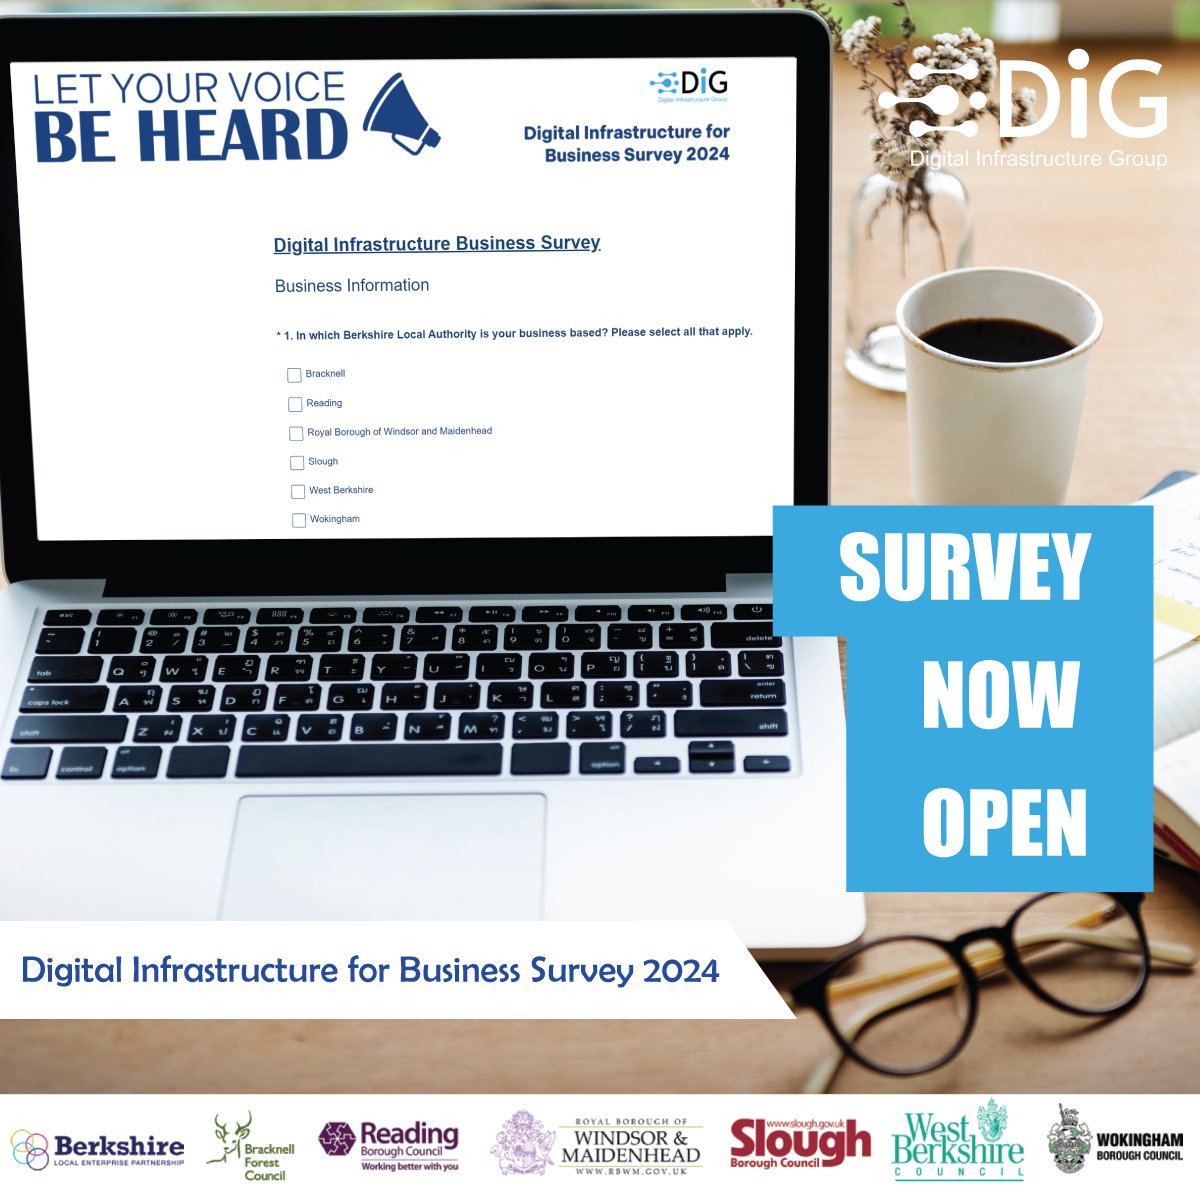 Calling all Berkshire businesses - Click the link bit.ly/DI4Bus2024 - take the Digital Infrastructure for Business survey now! #ConnectedBerkshire #BerkshireBusiness #DI4BusSurvey @WokinghamBC @TValleyChamber @ThamesValley @SloughMeans